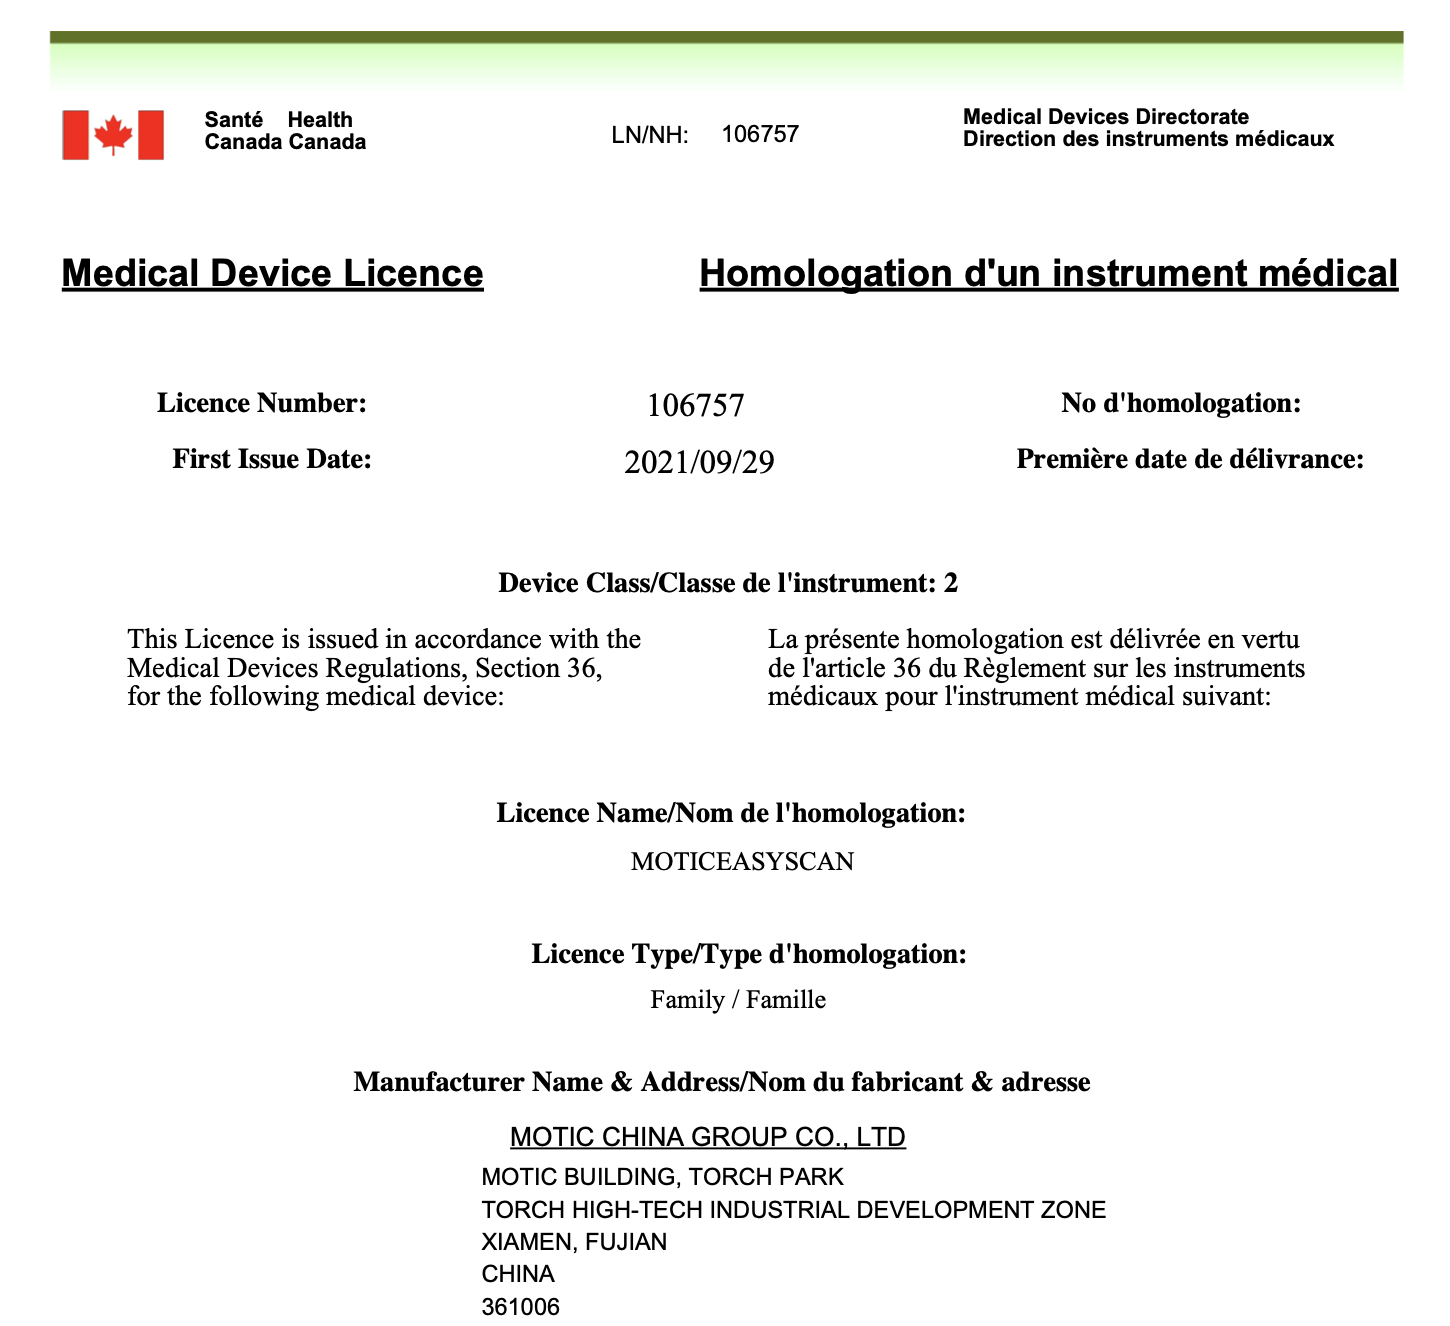 Motic Proudly Announces Class II Device Approval from Health Canada